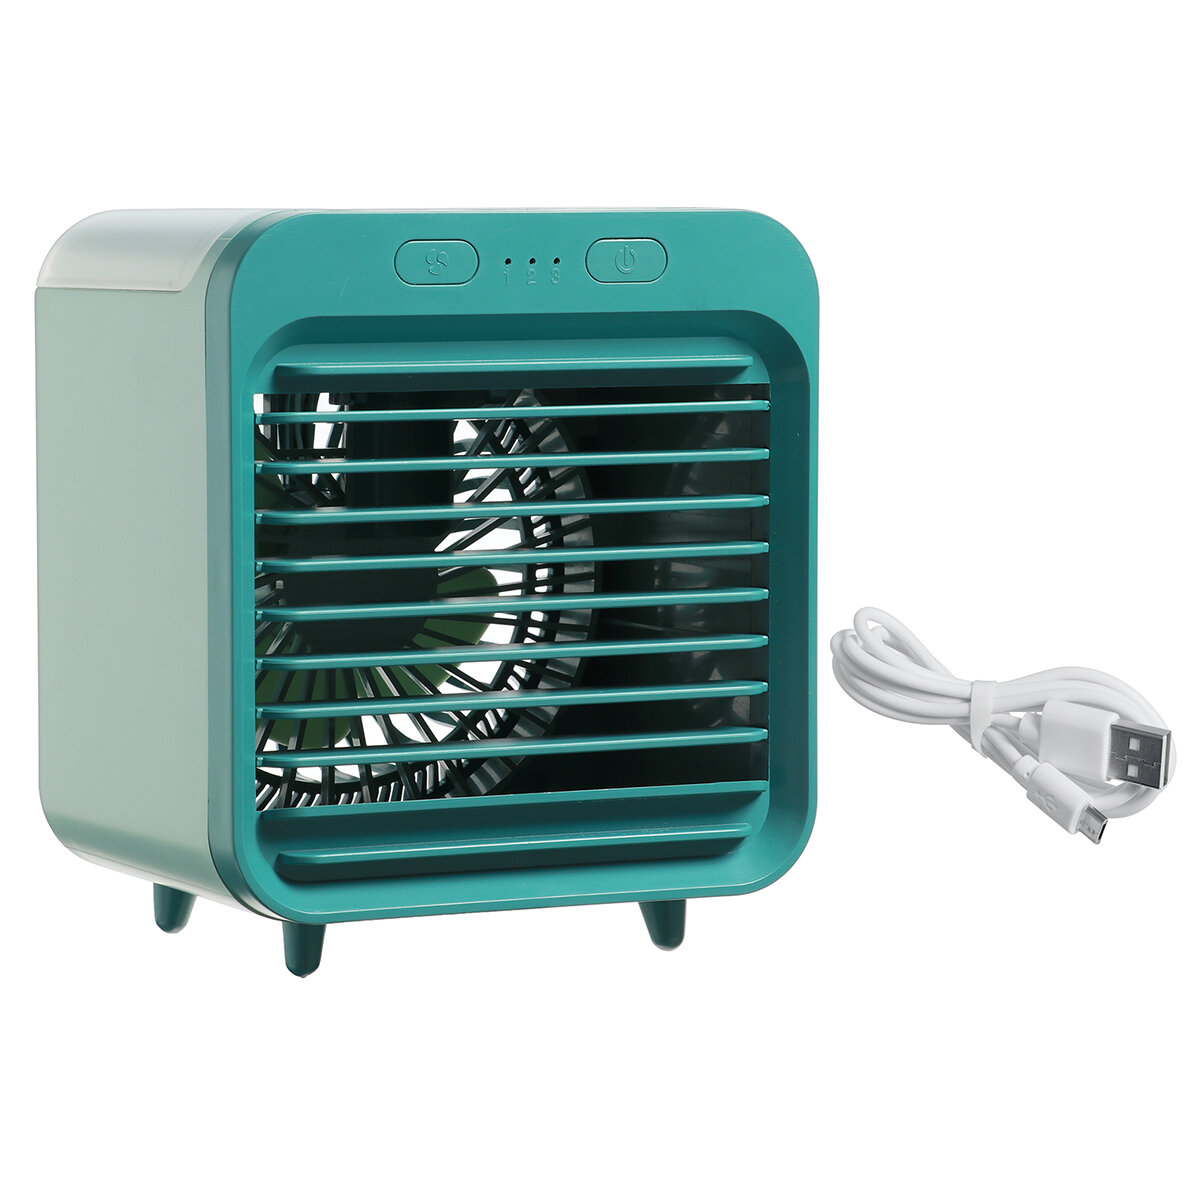 

Portable Mini Personal Air Conditioner Desktop Fan Space Cooler USB Rechargeable 3 Gears Air Cooling Fan